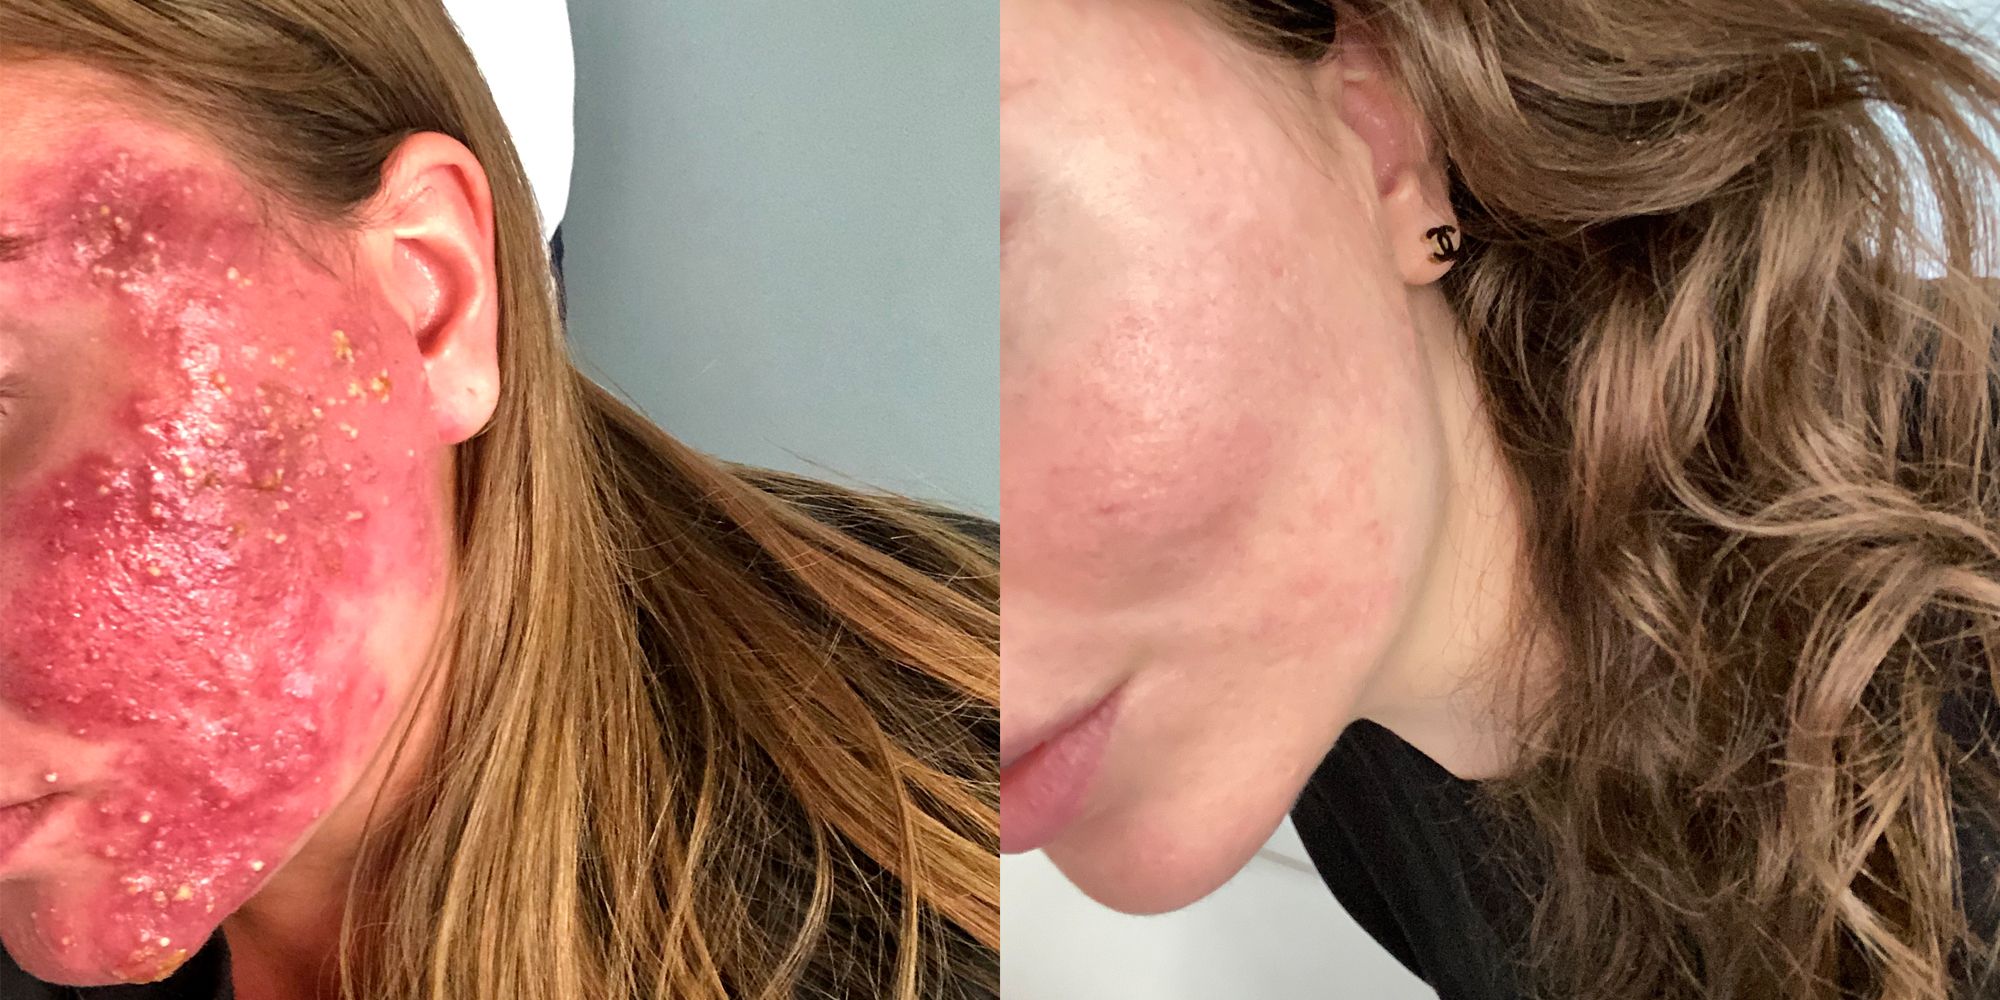 Roaccutane: What It's Like to Take the Acne-control Medication